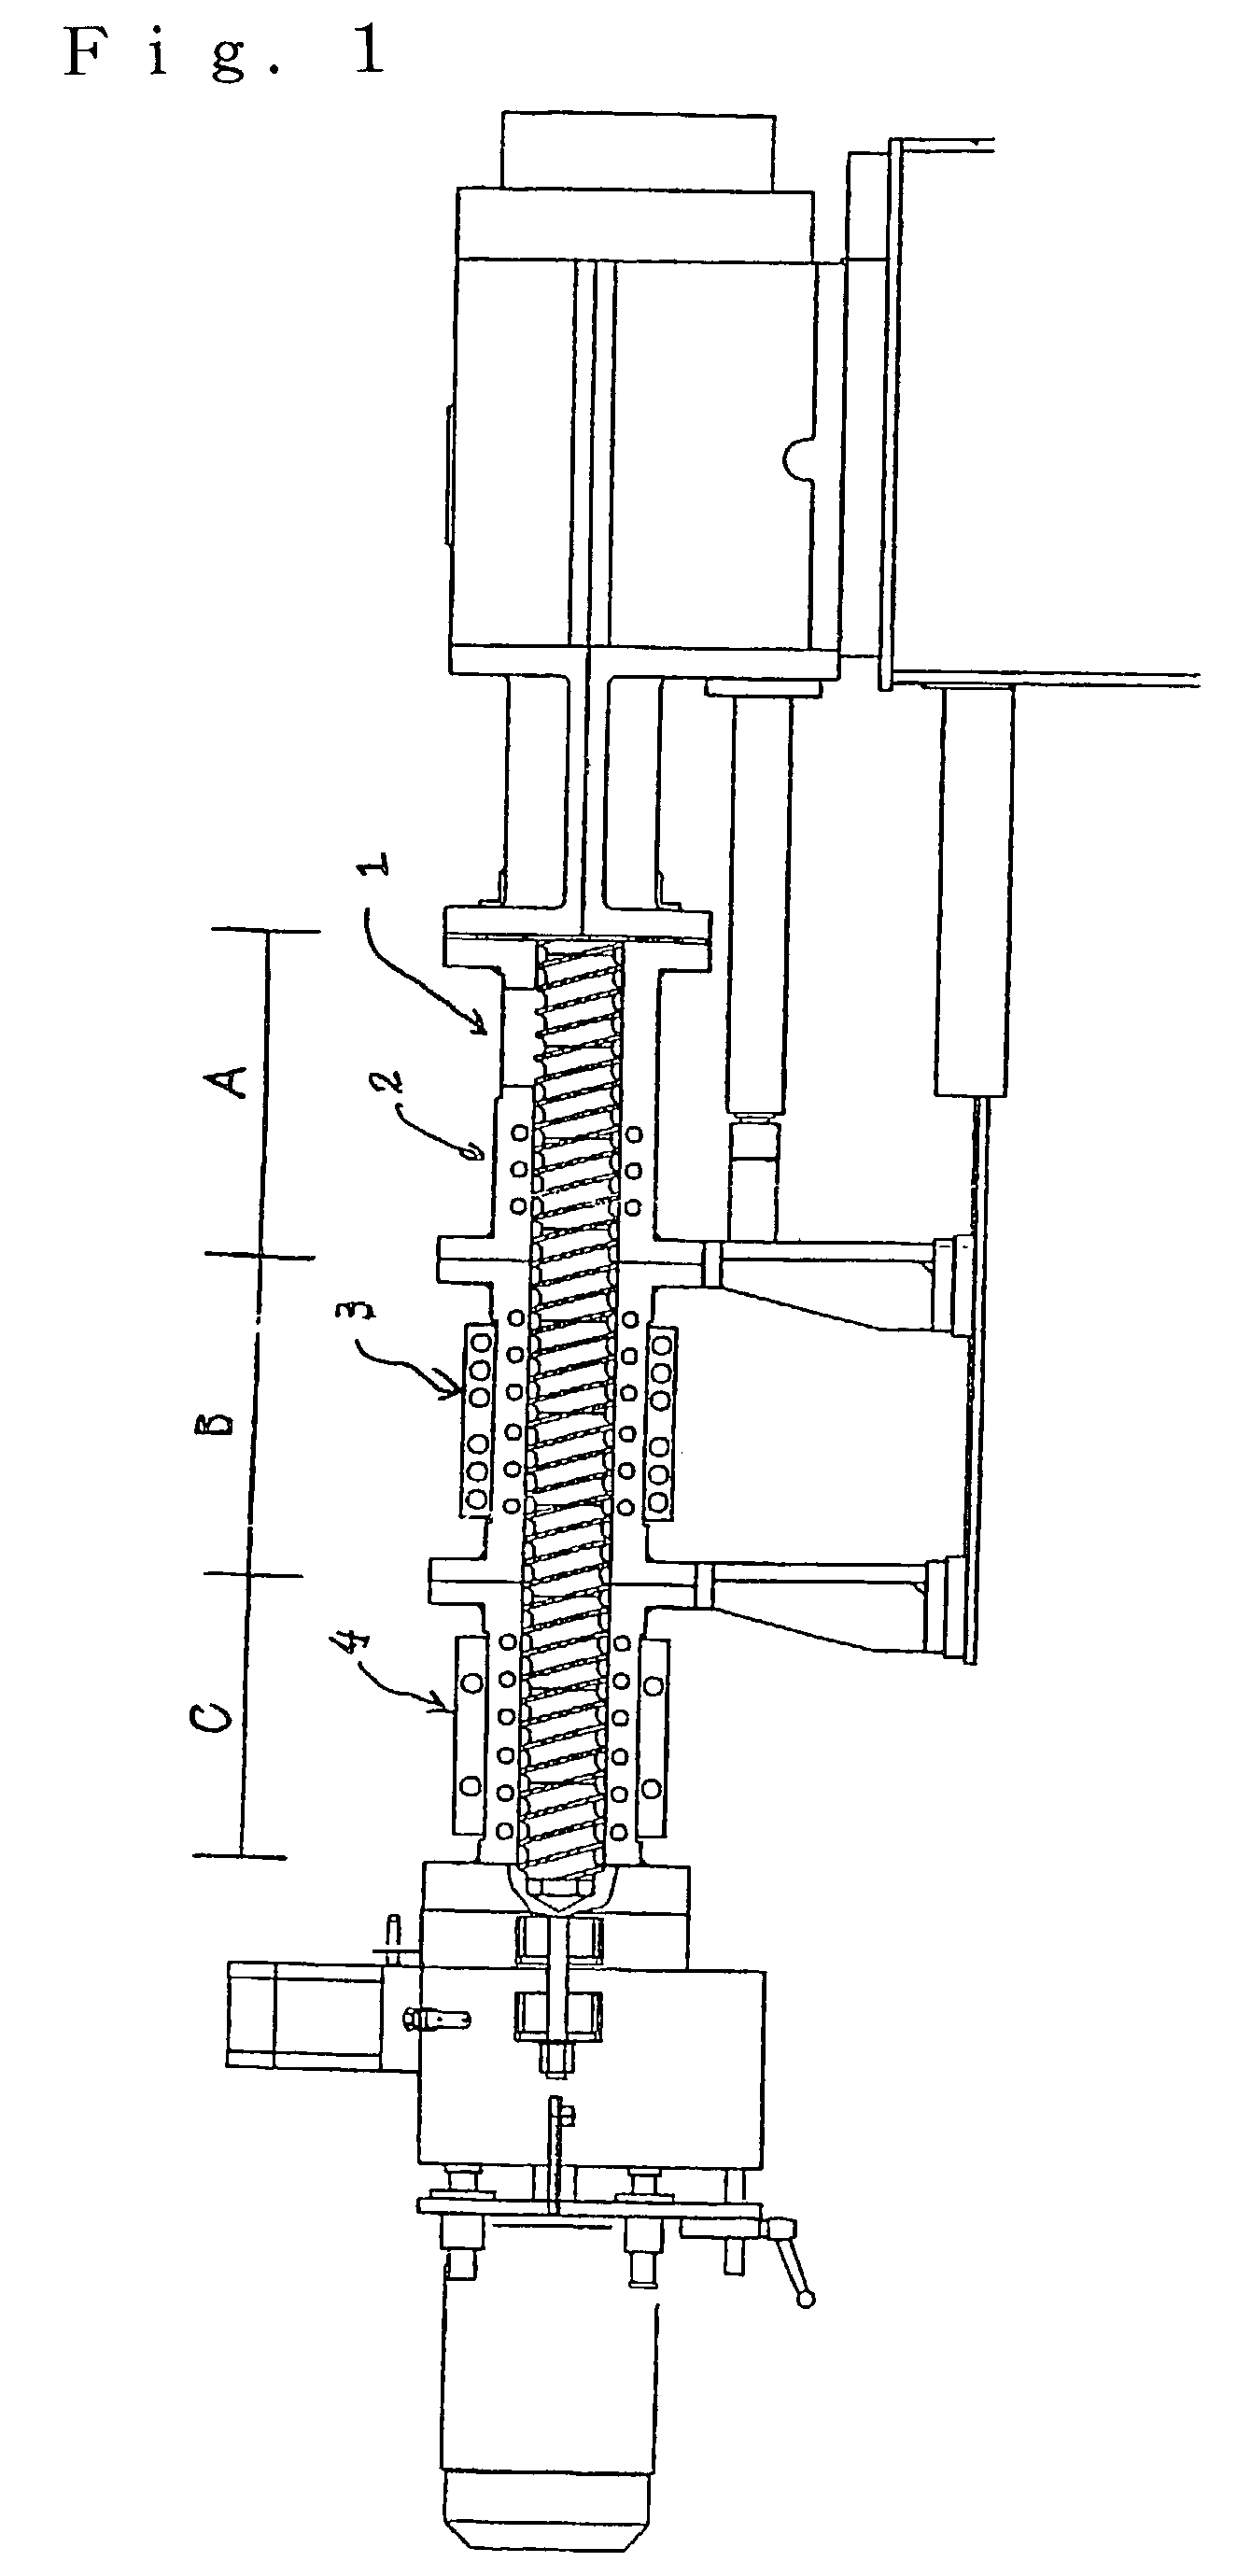 Process for producing fatty acid salt and livestock feed containing the fatty acid salt